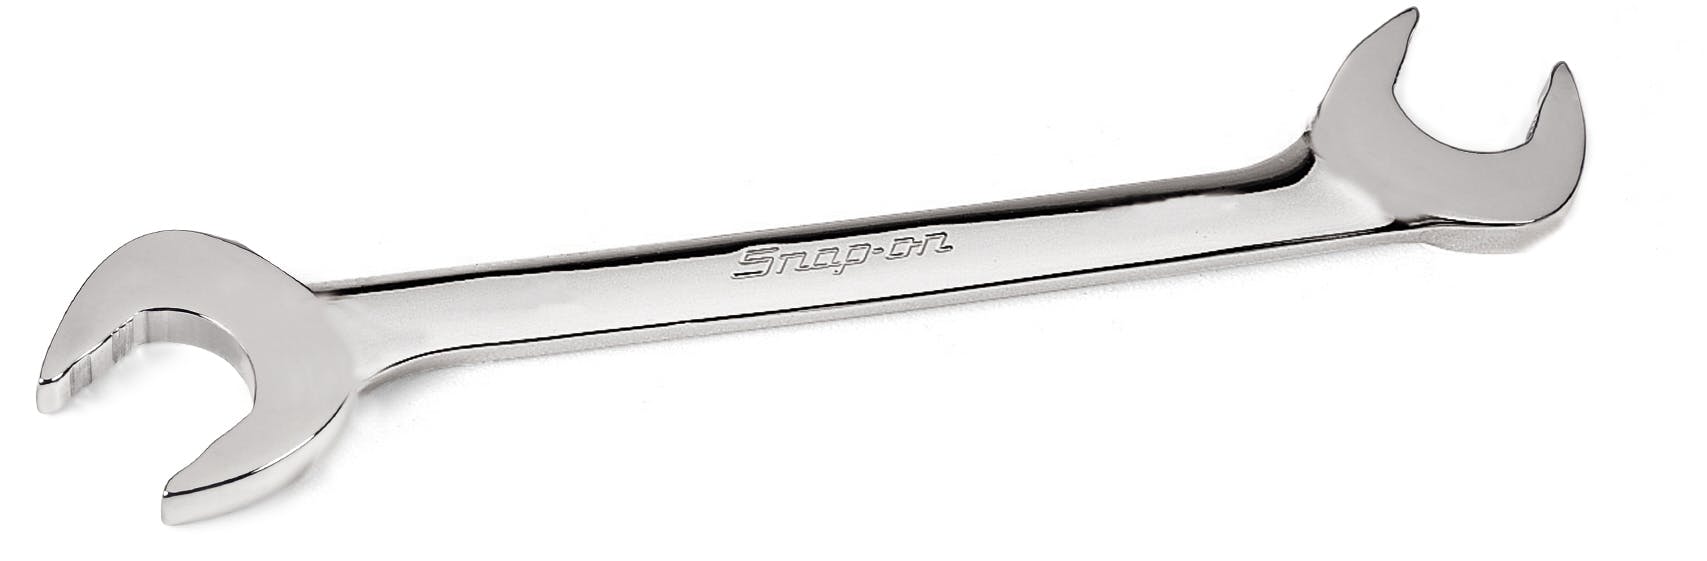 Four-Way Angle Head, inches | Snap-on Store